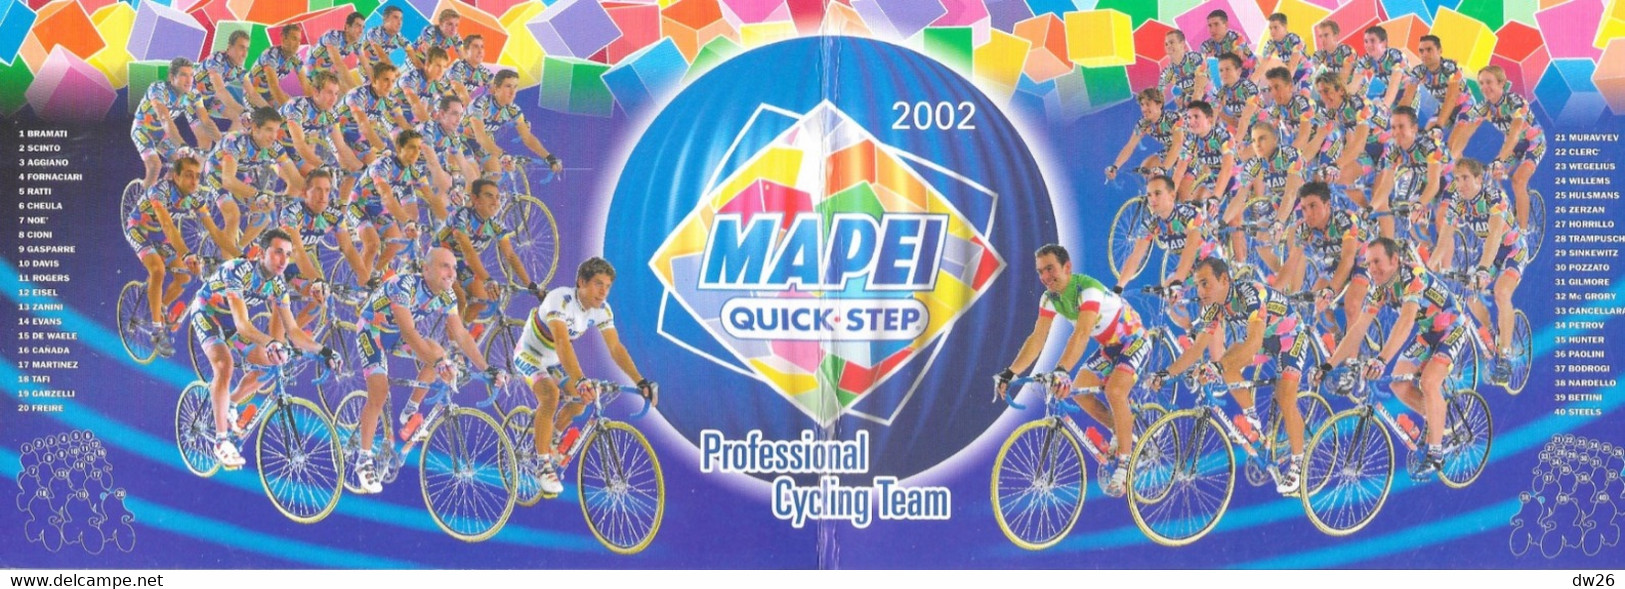 Fiche Cyclisme - Equipe Cycliste Professionnelle MAPEI Quick-Stup (Professional Cycling Team) Carte Double - Sport